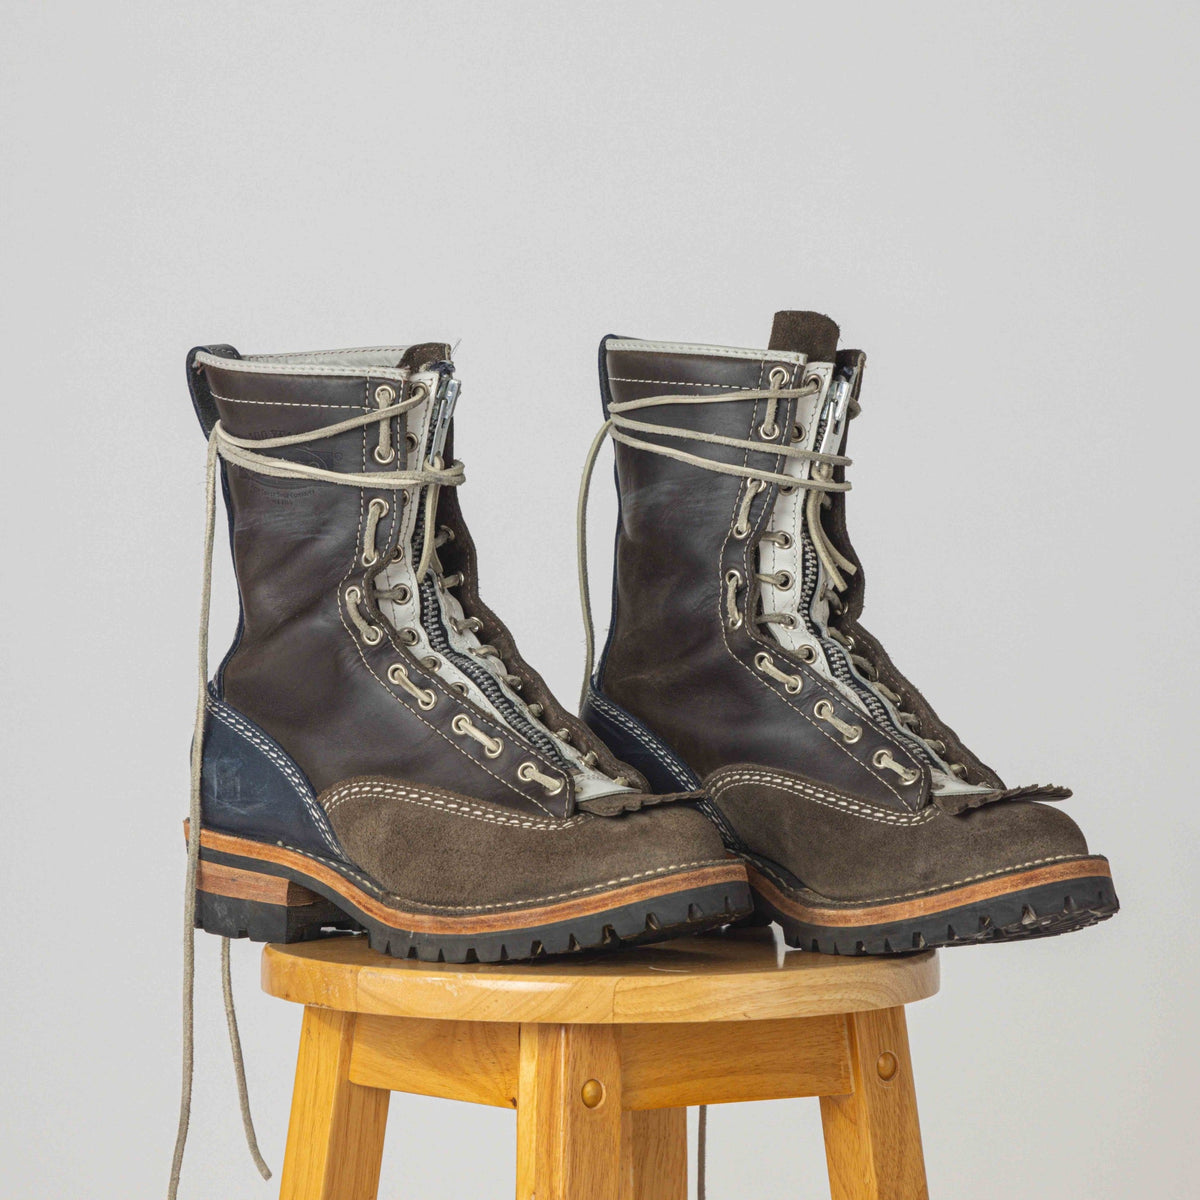 ATH x WESCO MERC7 JOBMASTER BOOTS (NAVY/CHARCOAL) – ALL-TIME HIGH